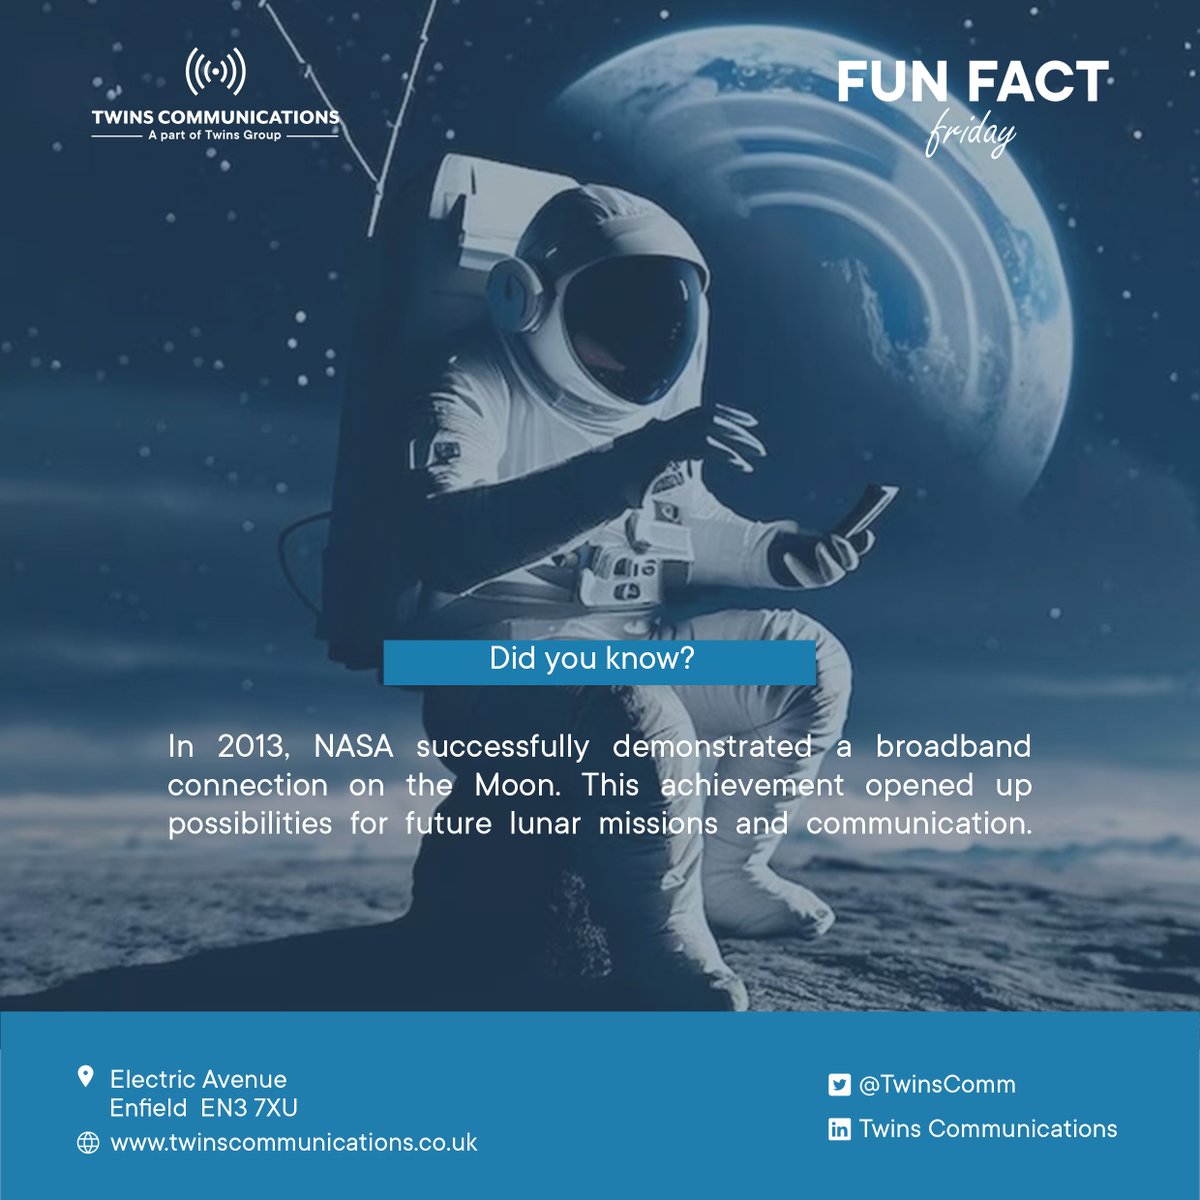 Connecting worlds beyond ours! 🌕🚀
#TwinsCommunications #FunFact  #LunarConnectivity #NASAInnovation